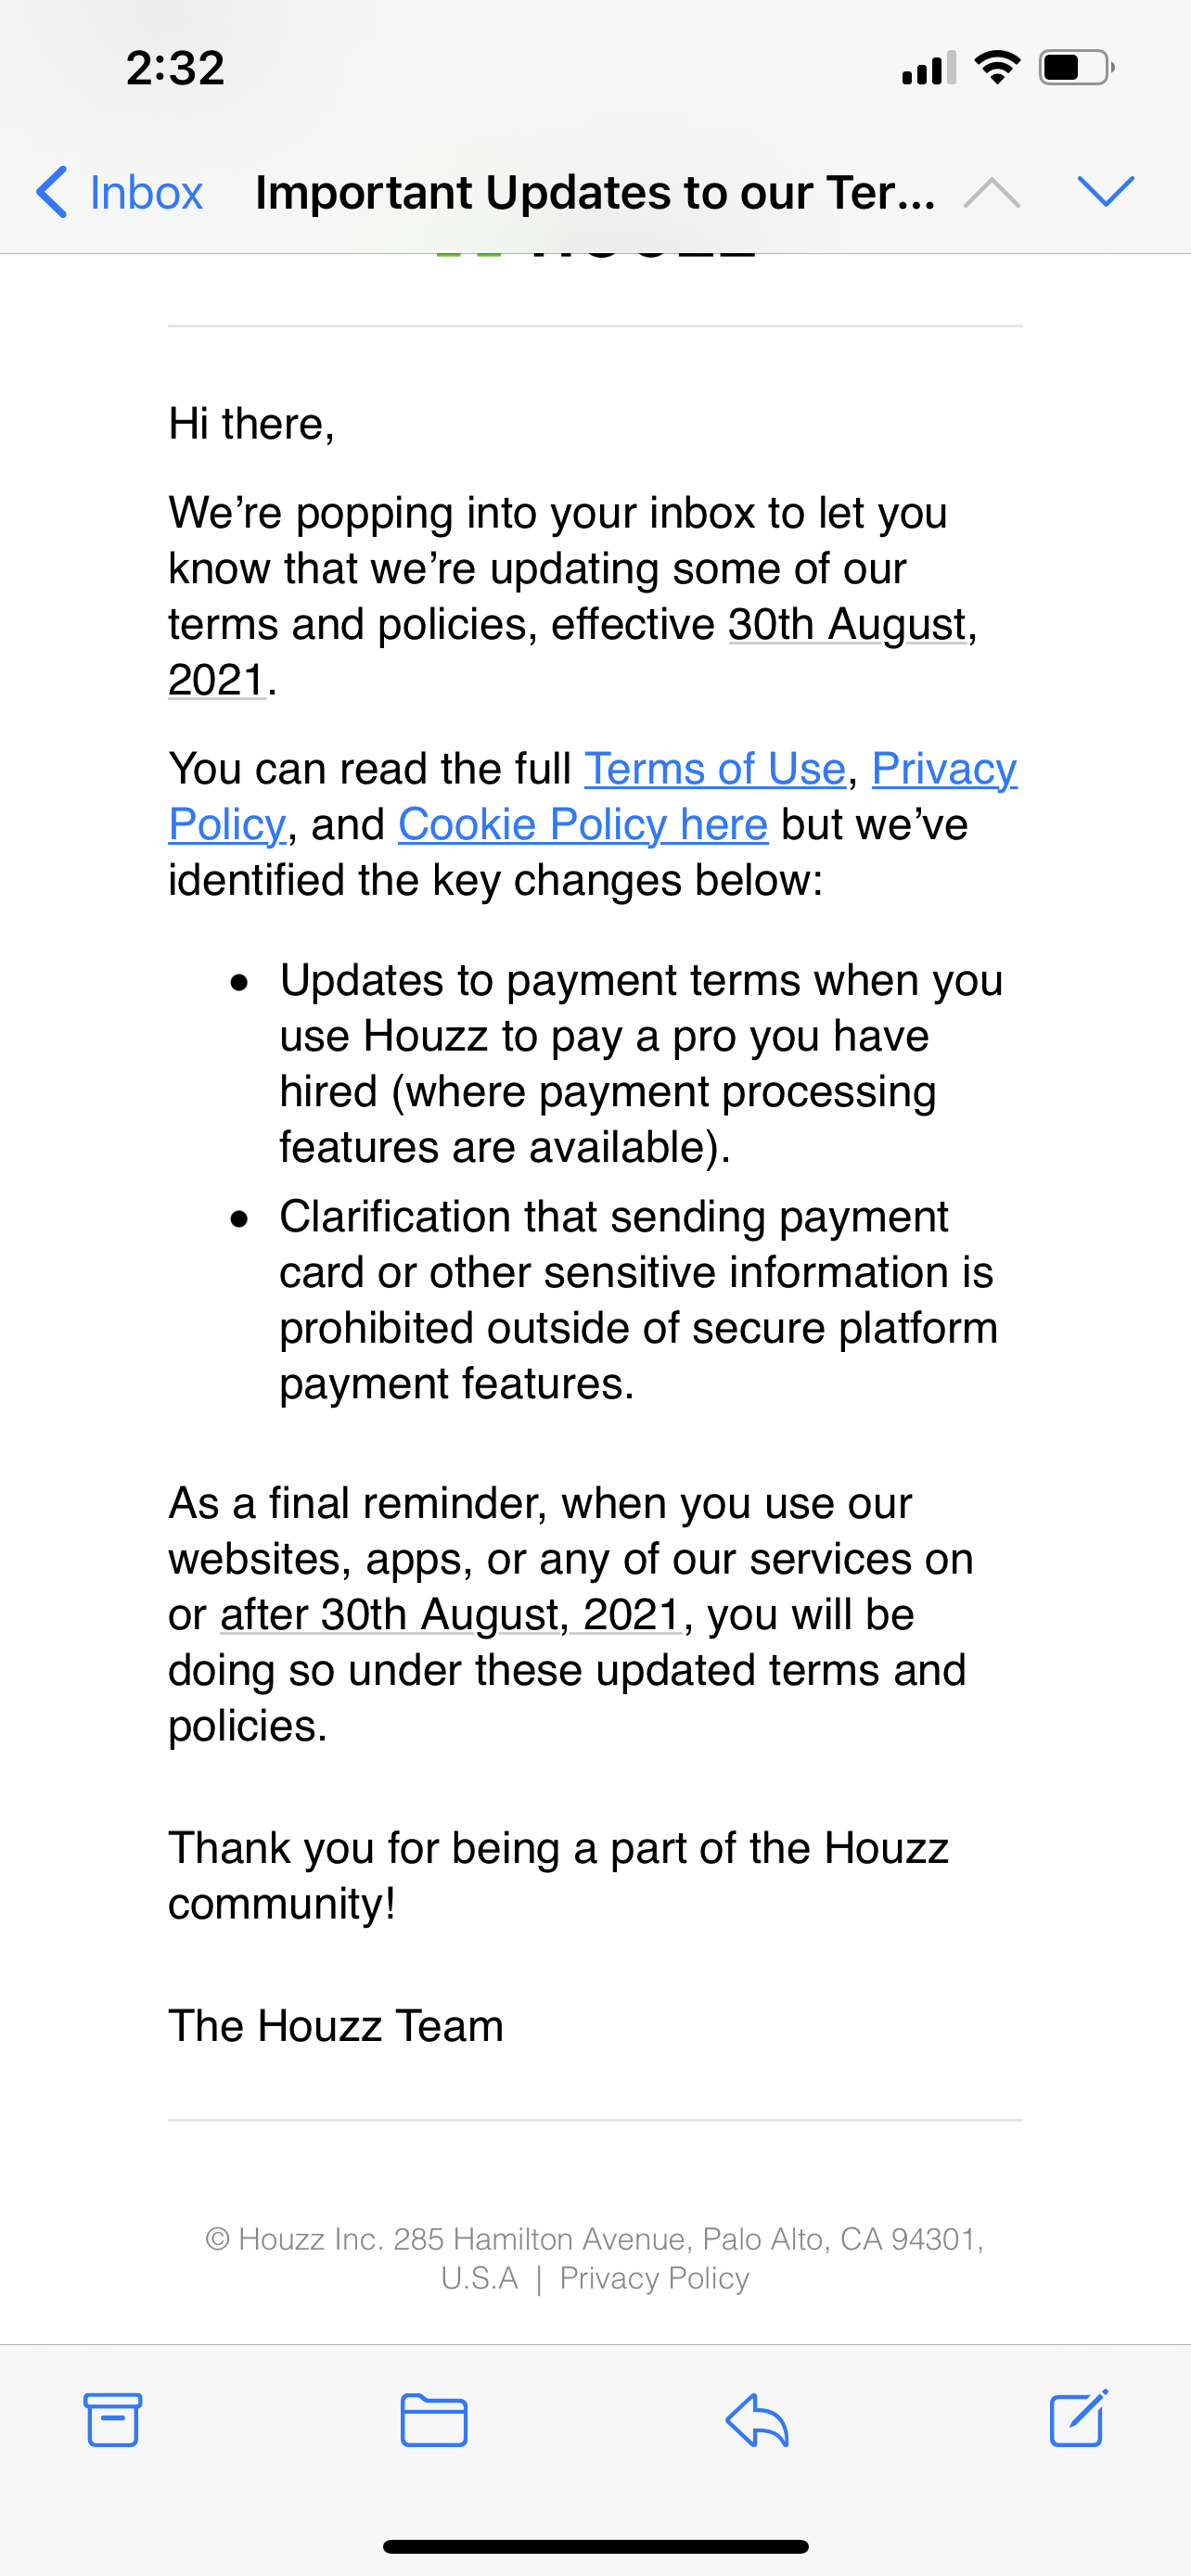 Houzz complaint Houzz not registering unsubscribe from emails